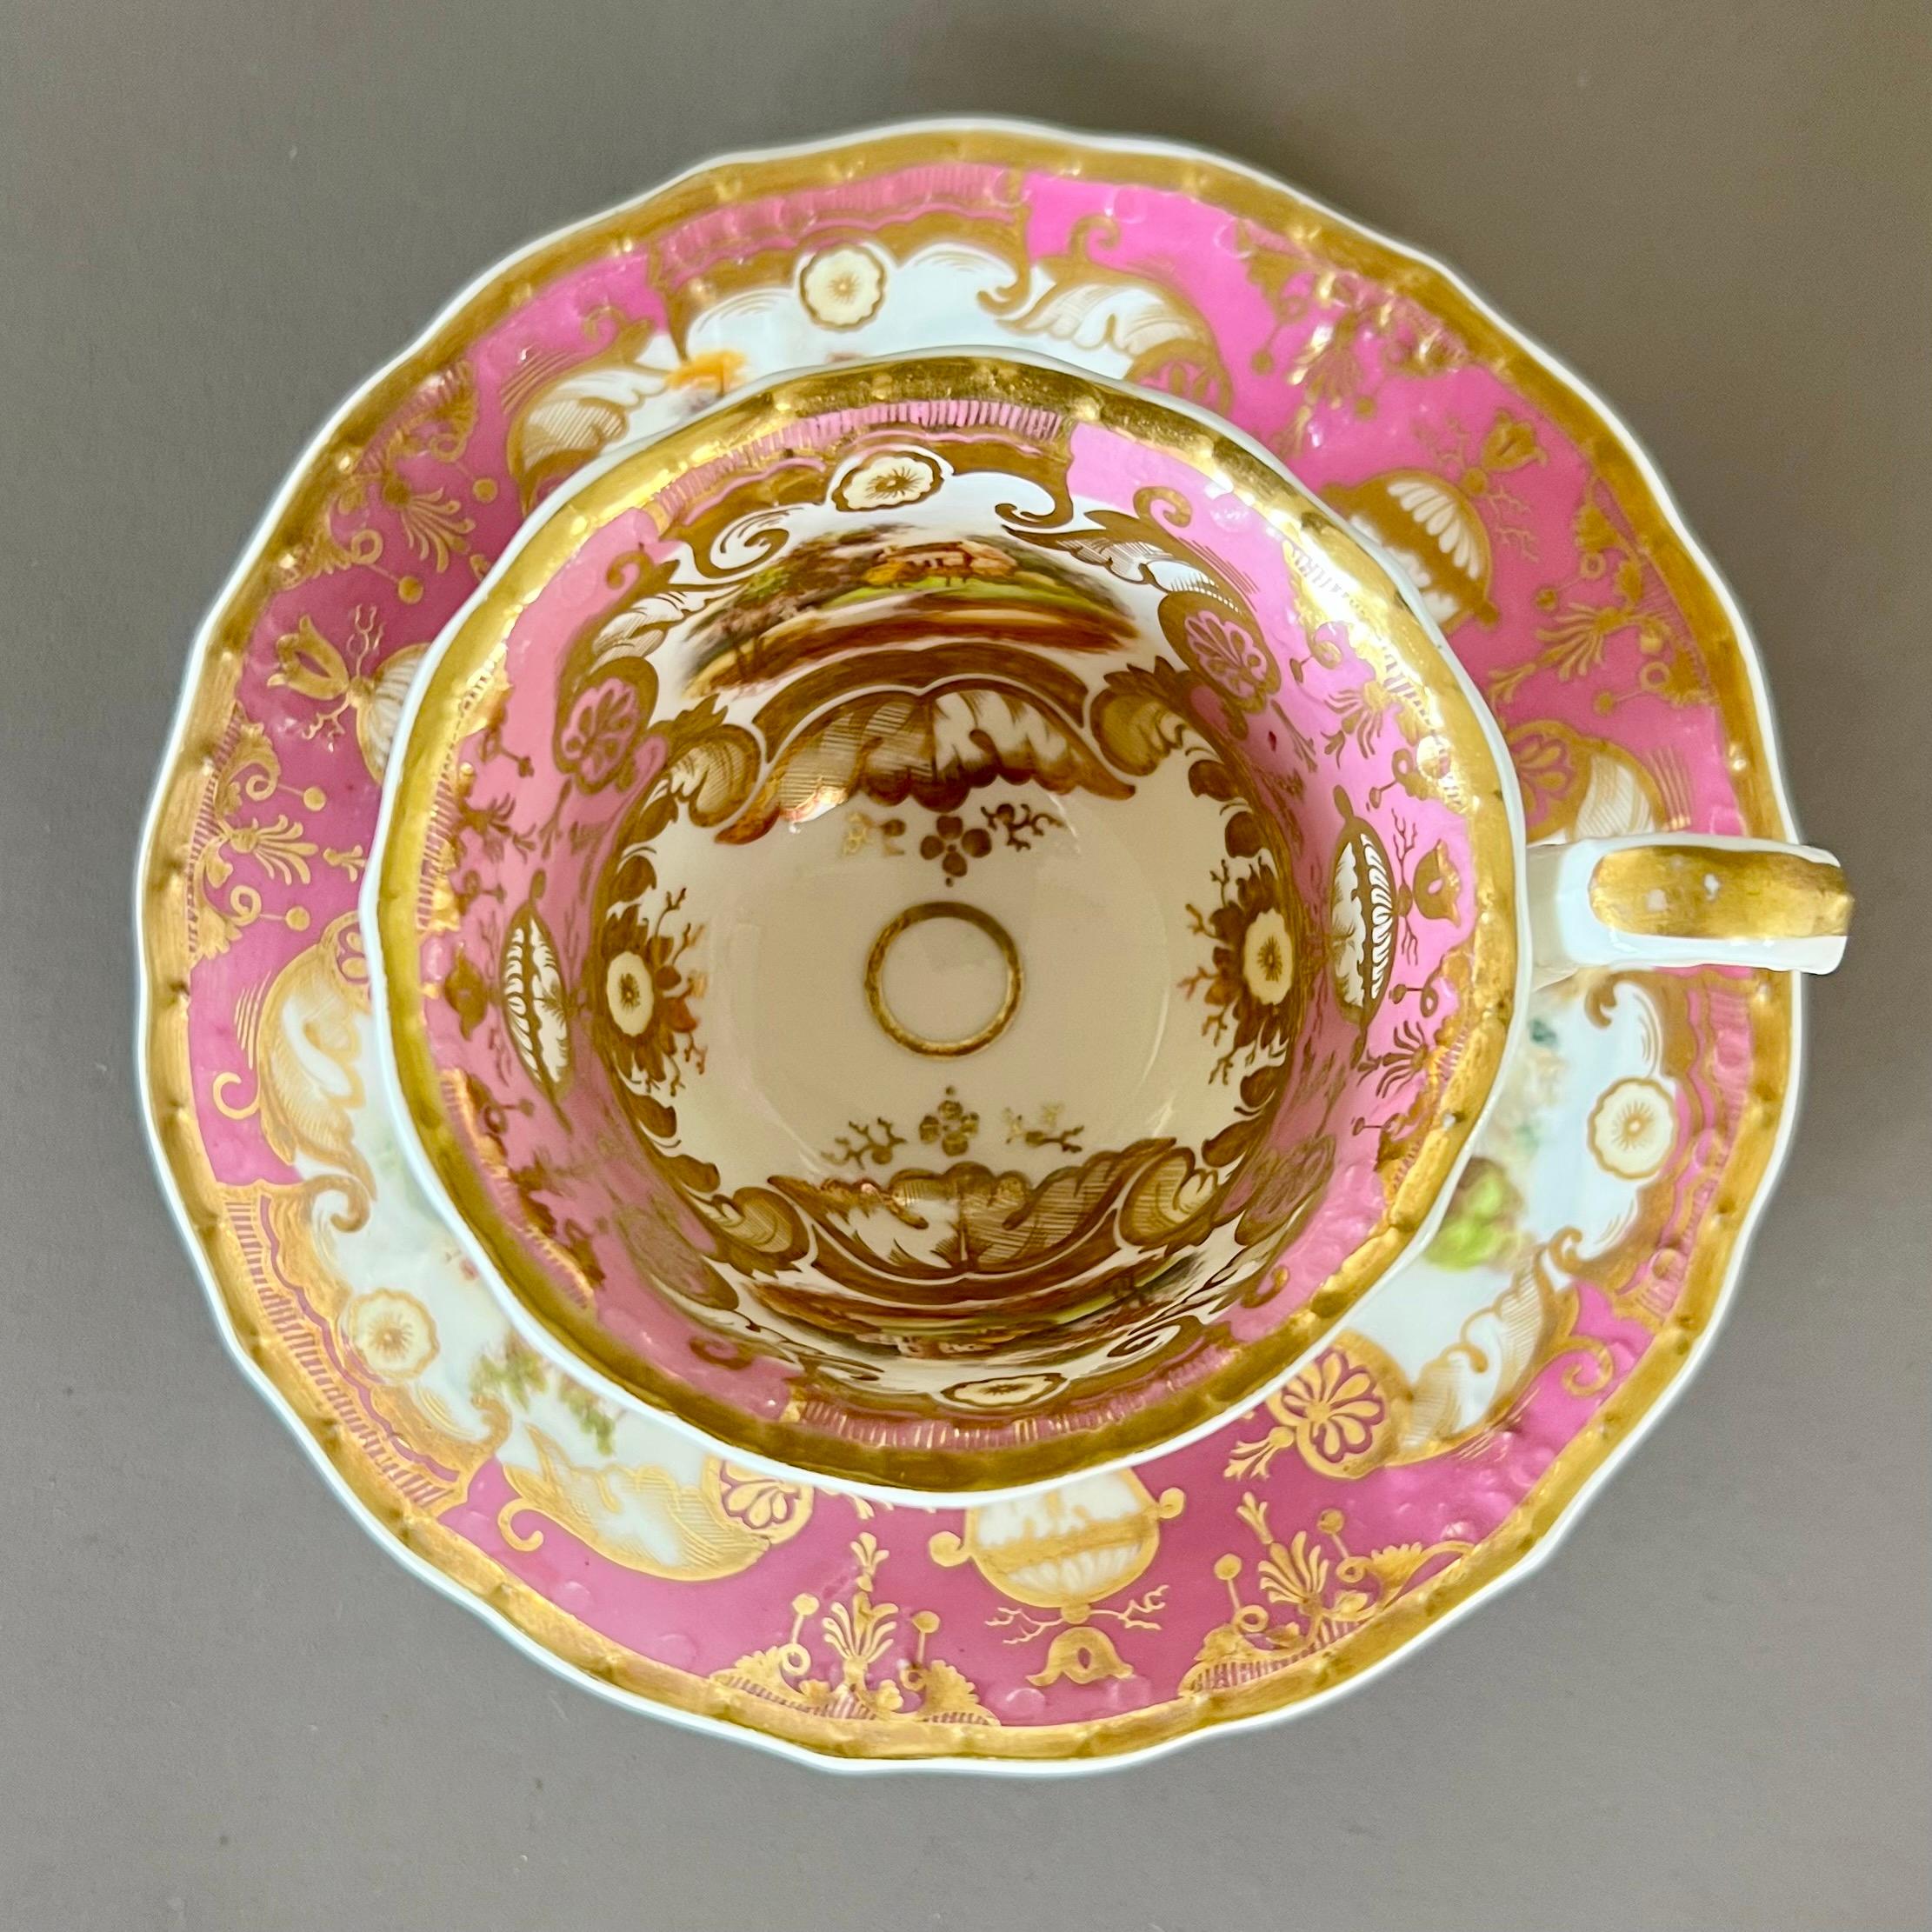 Early 19th Century Samuel Alcock Porcelain Teacup Trio, Pink, Gilt and Sublime Landscapes, ca 1827